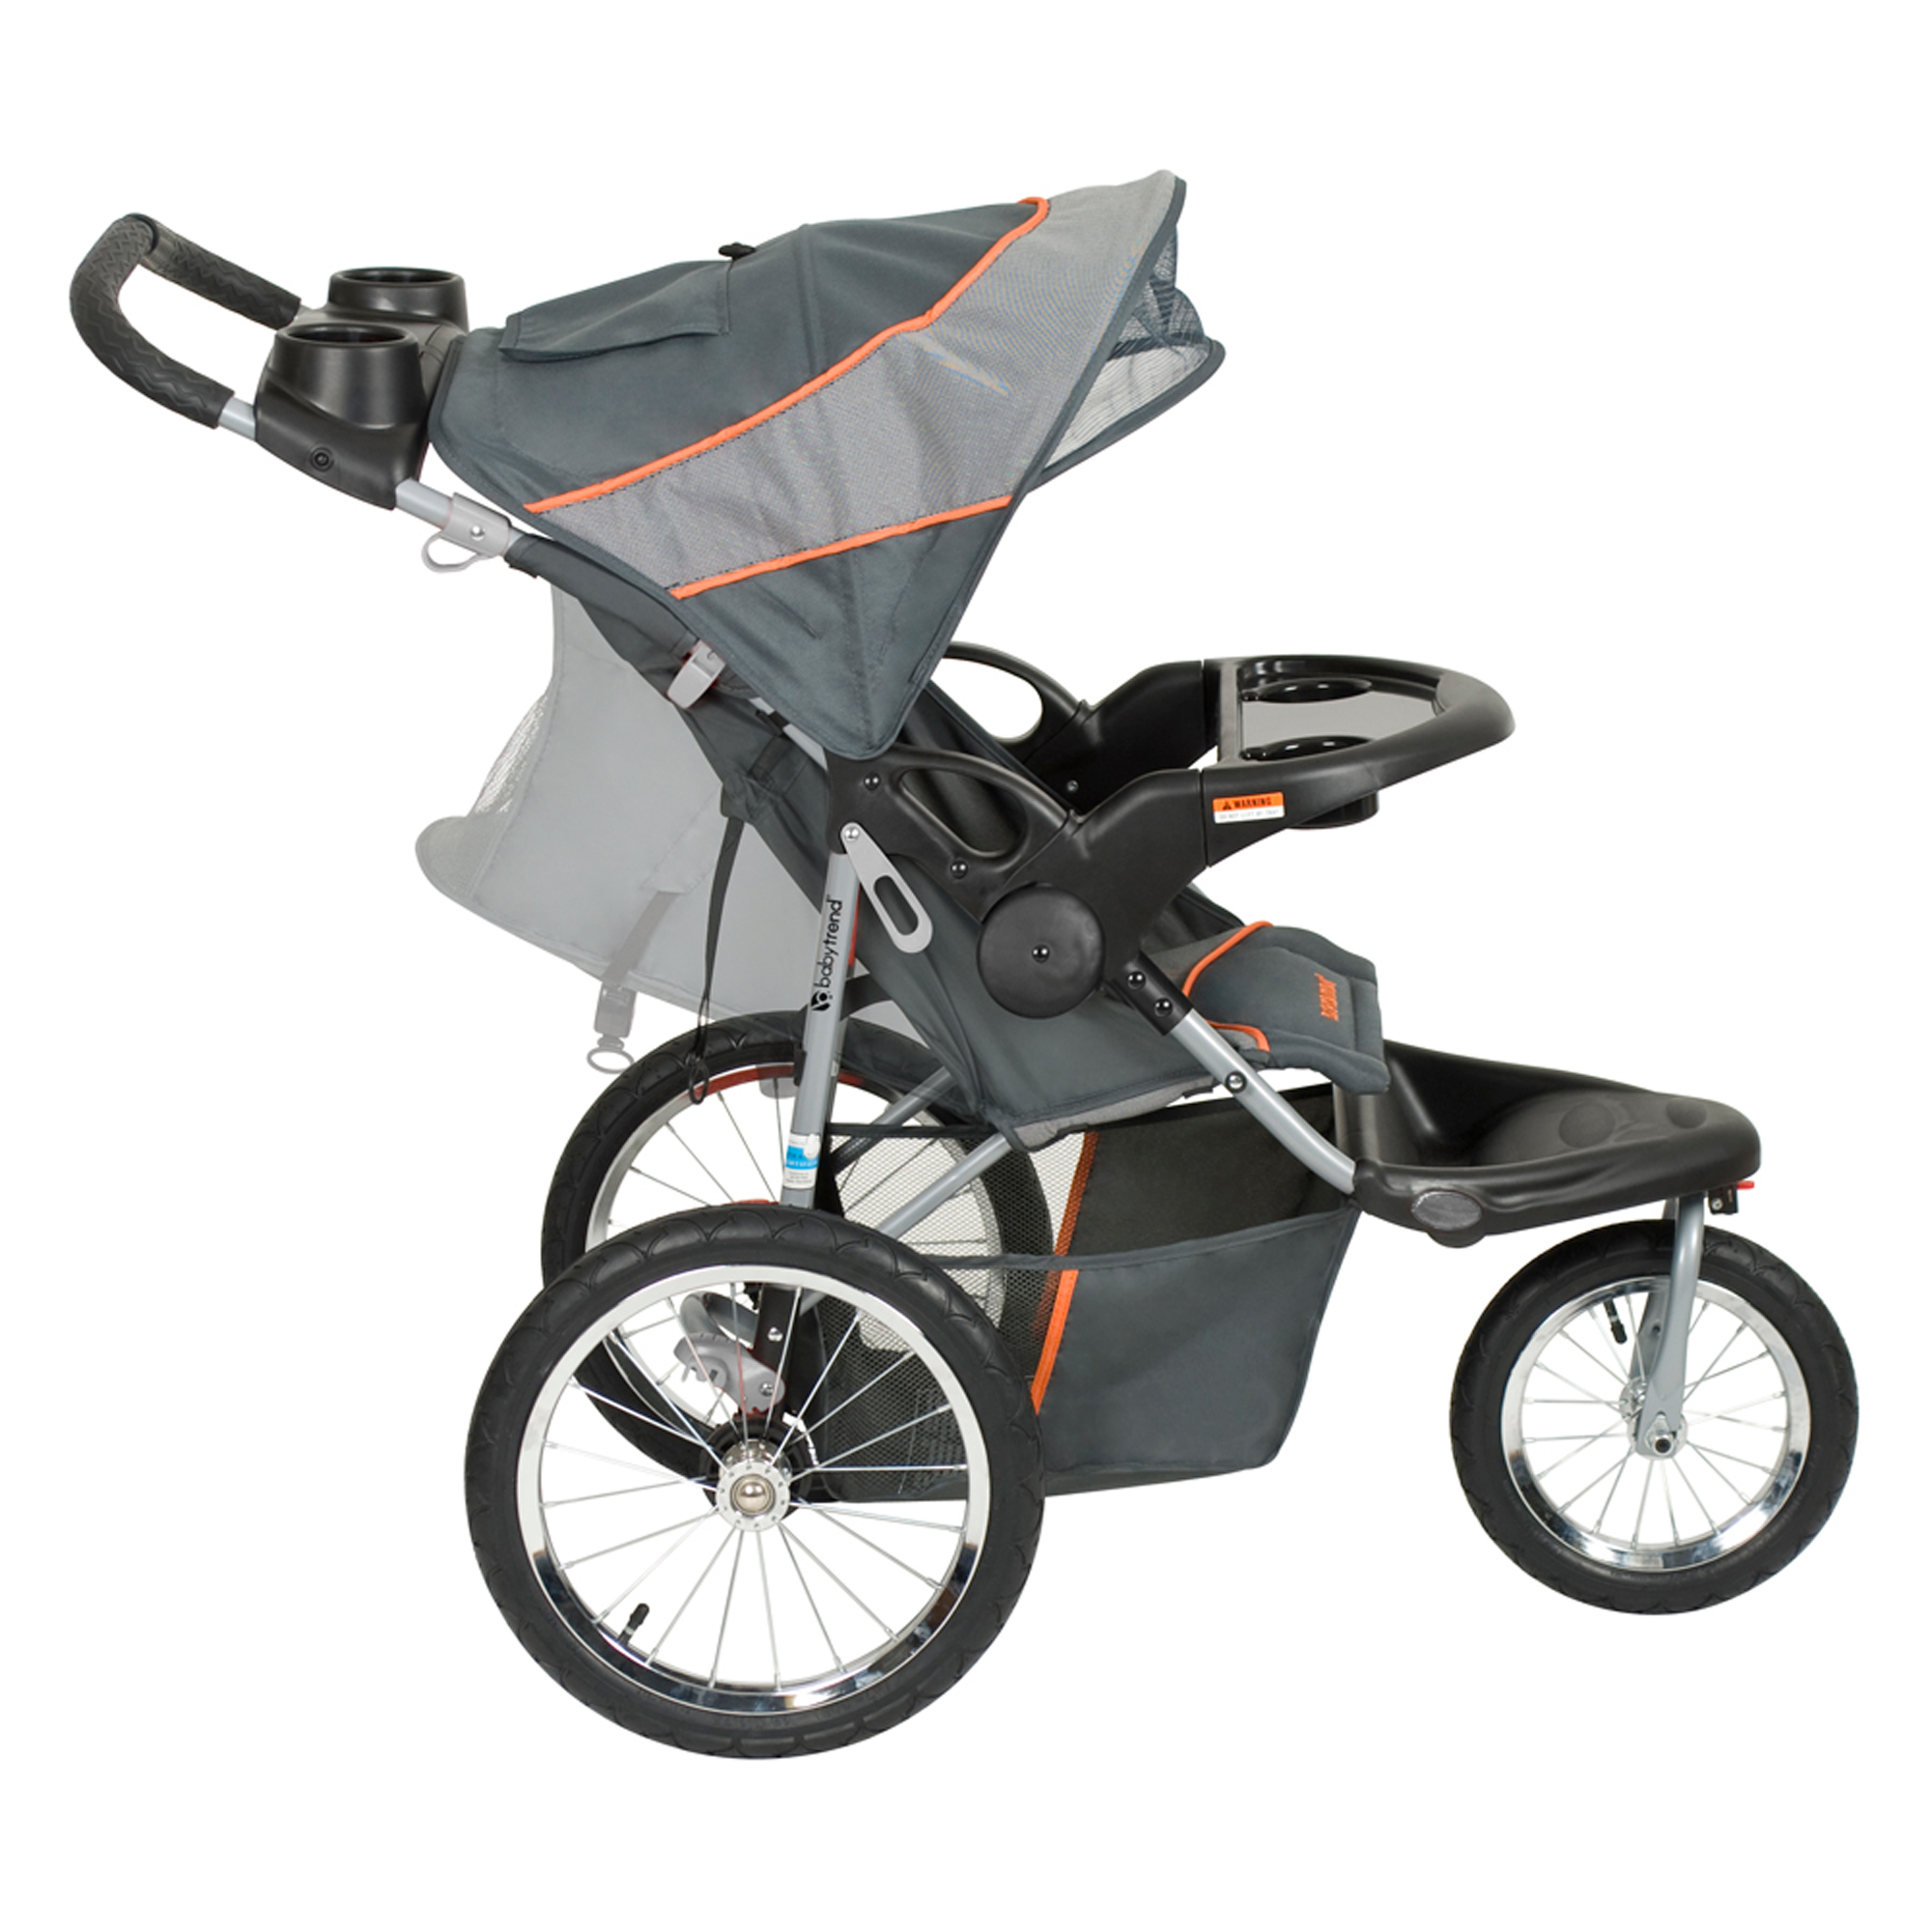 Baby Trend Expedition Jogging Stroller, Vanguard - image 4 of 6